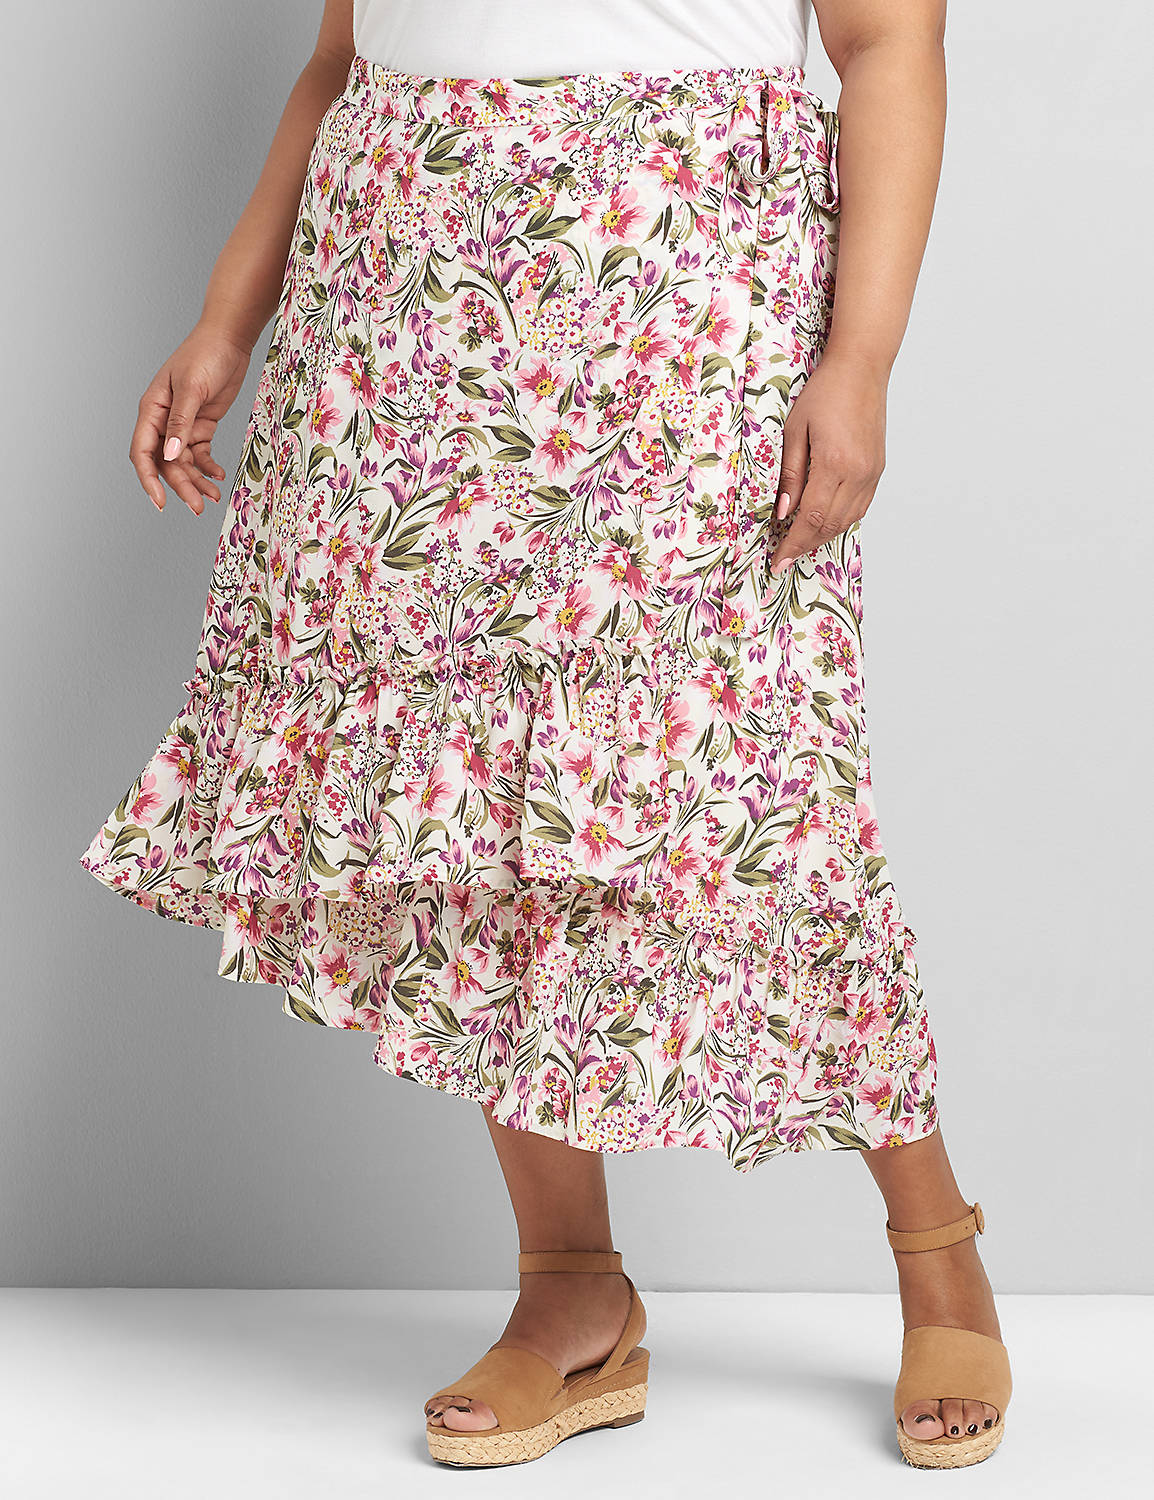 1119174 MIDI WRAP SKIRT W/TIE 1119174:LBSP21257_EvelynFloral_C1:18/20 Product Image 3